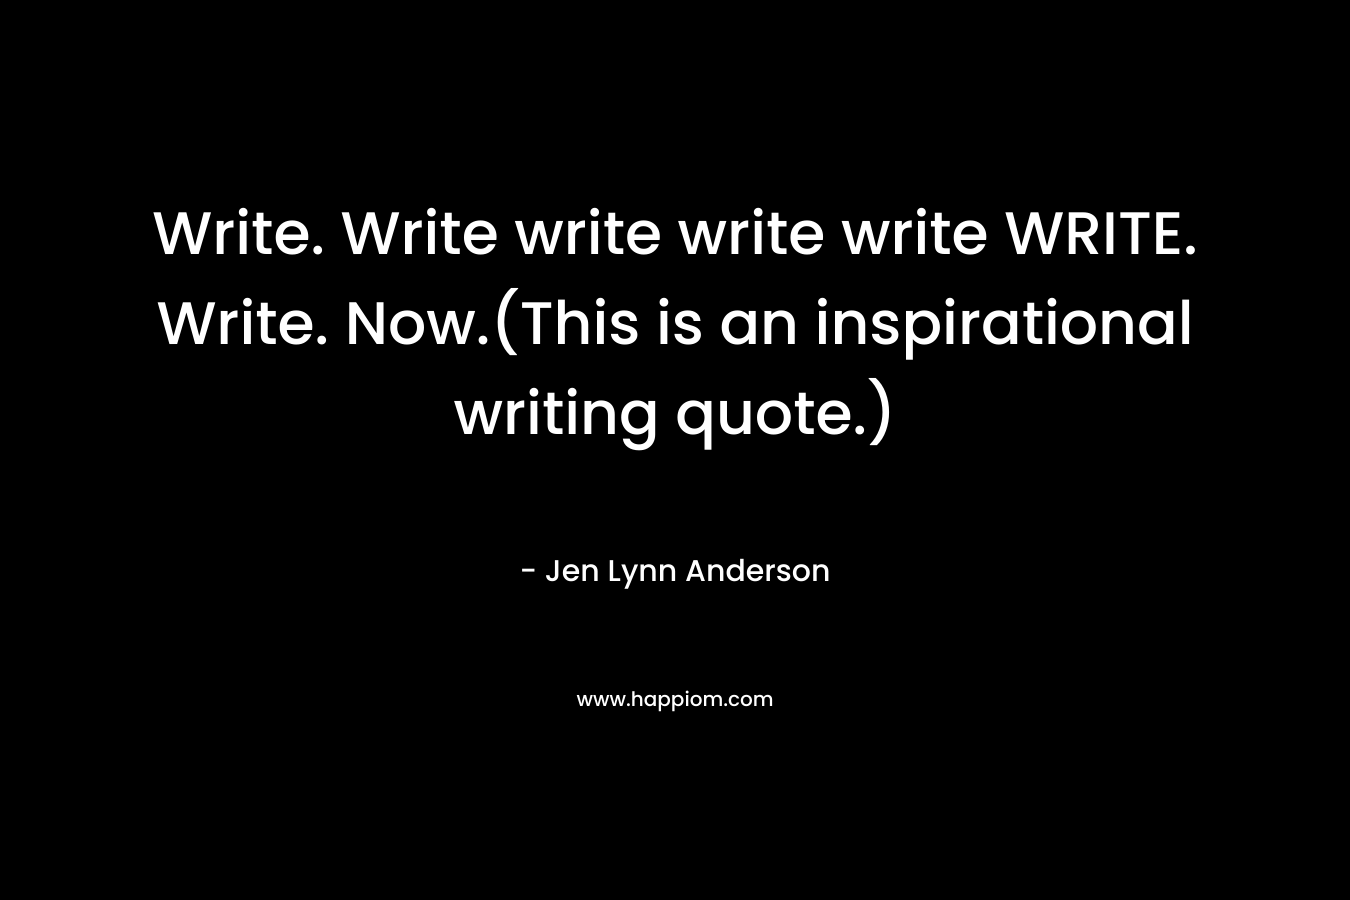 Write. Write write write write WRITE. Write. Now.(This is an inspirational writing quote.)